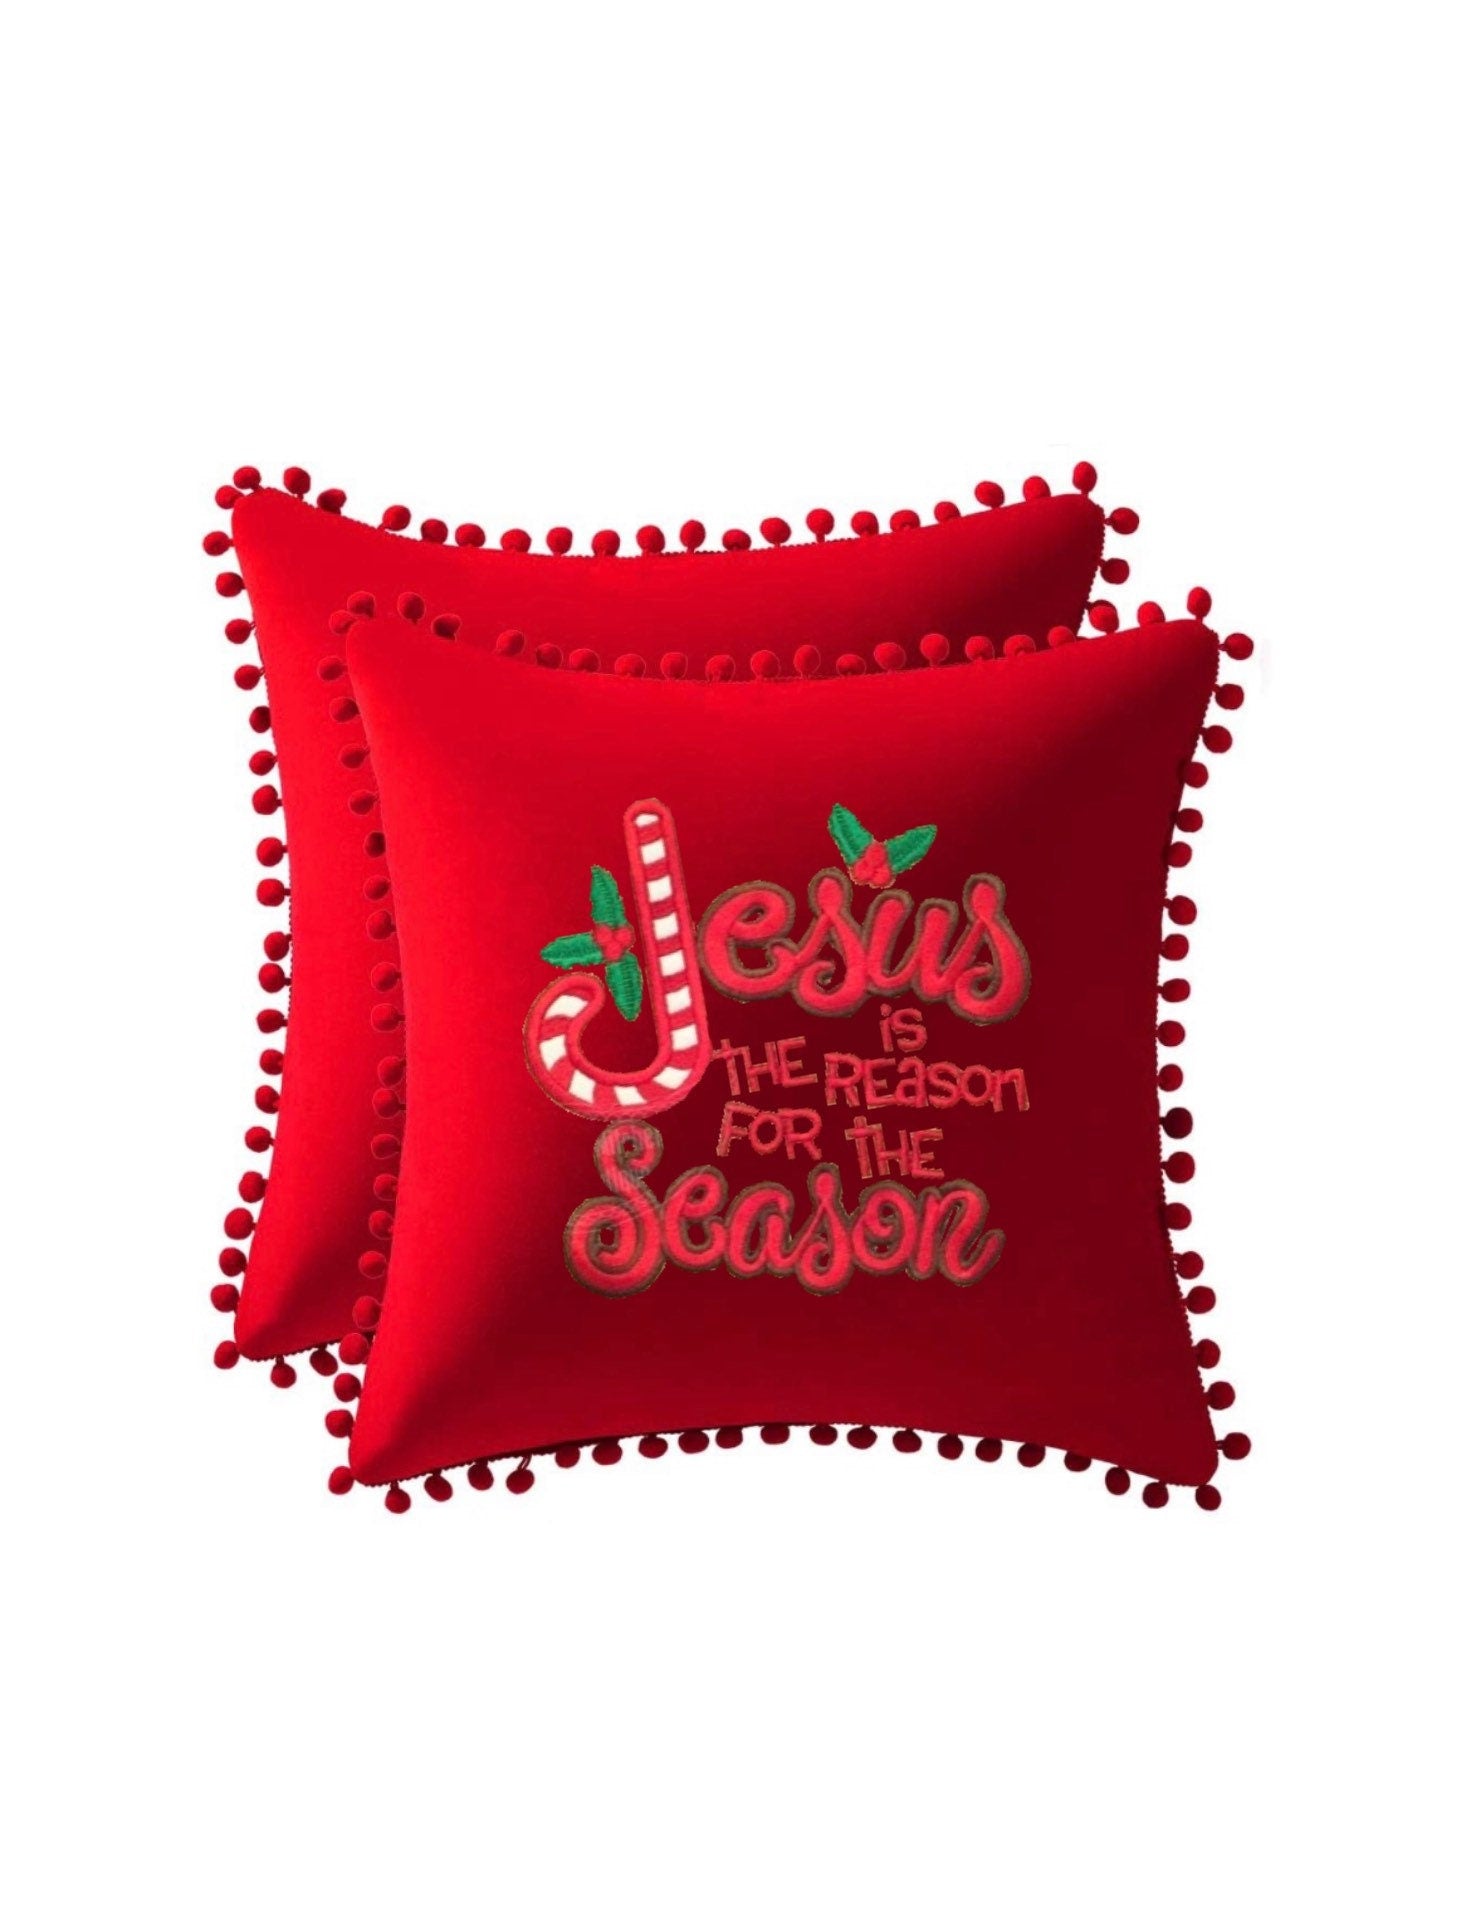 Christmas “Jesus is the Reason for the Season”  Embroidered Throw Pillow Cover. Cotton or Velvet decorative pillow cover